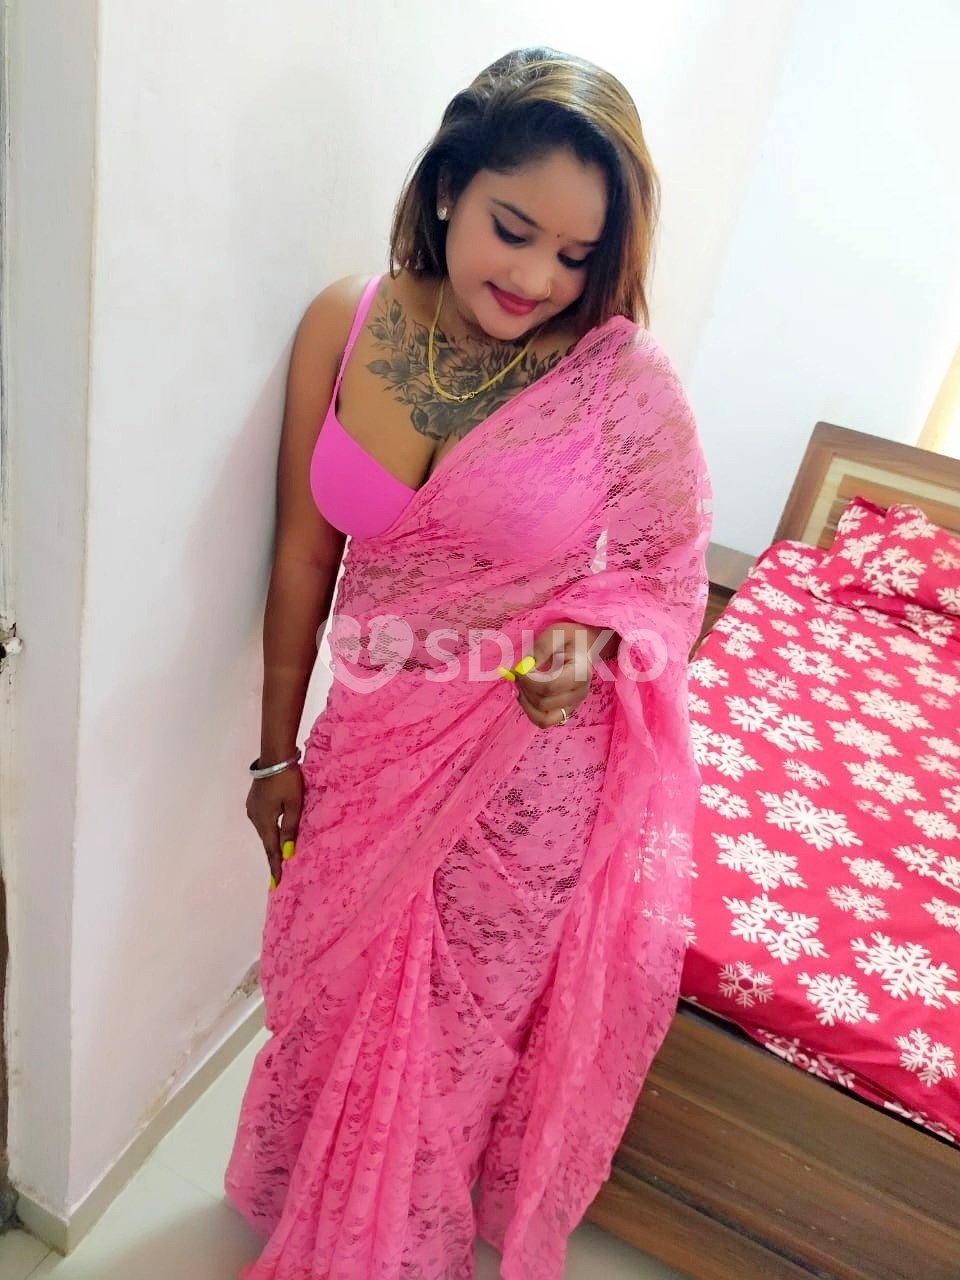 Serilingampally AMISHA) (V I P) LOW RATE DIRECT ESCORT FULL SAFE AND SECURE 24 HORSE AVAILABLE BHABHI AND COLLEGE GIRL A